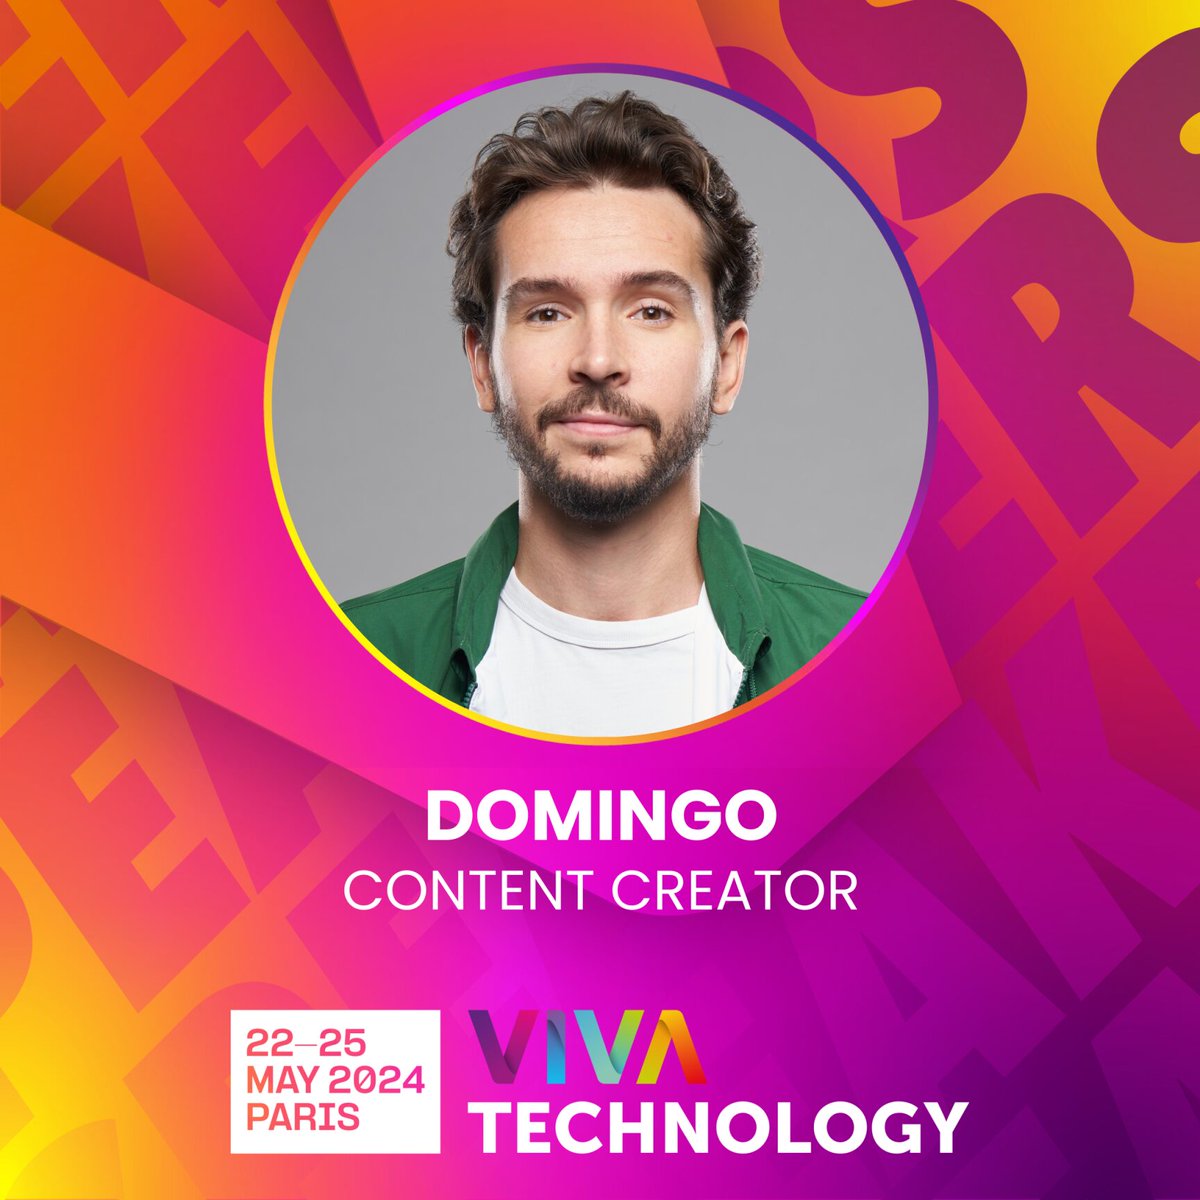 🎮 Big news: @Domingo joins our #VivaTech 2024 speaker lineup! With over a decade of experience on Twitch, Domingo has revolutionized the world of livestreaming and content. From gaming to entrepreneurship, he's done it all! Meet us on May 25 & level up your experience 🤩